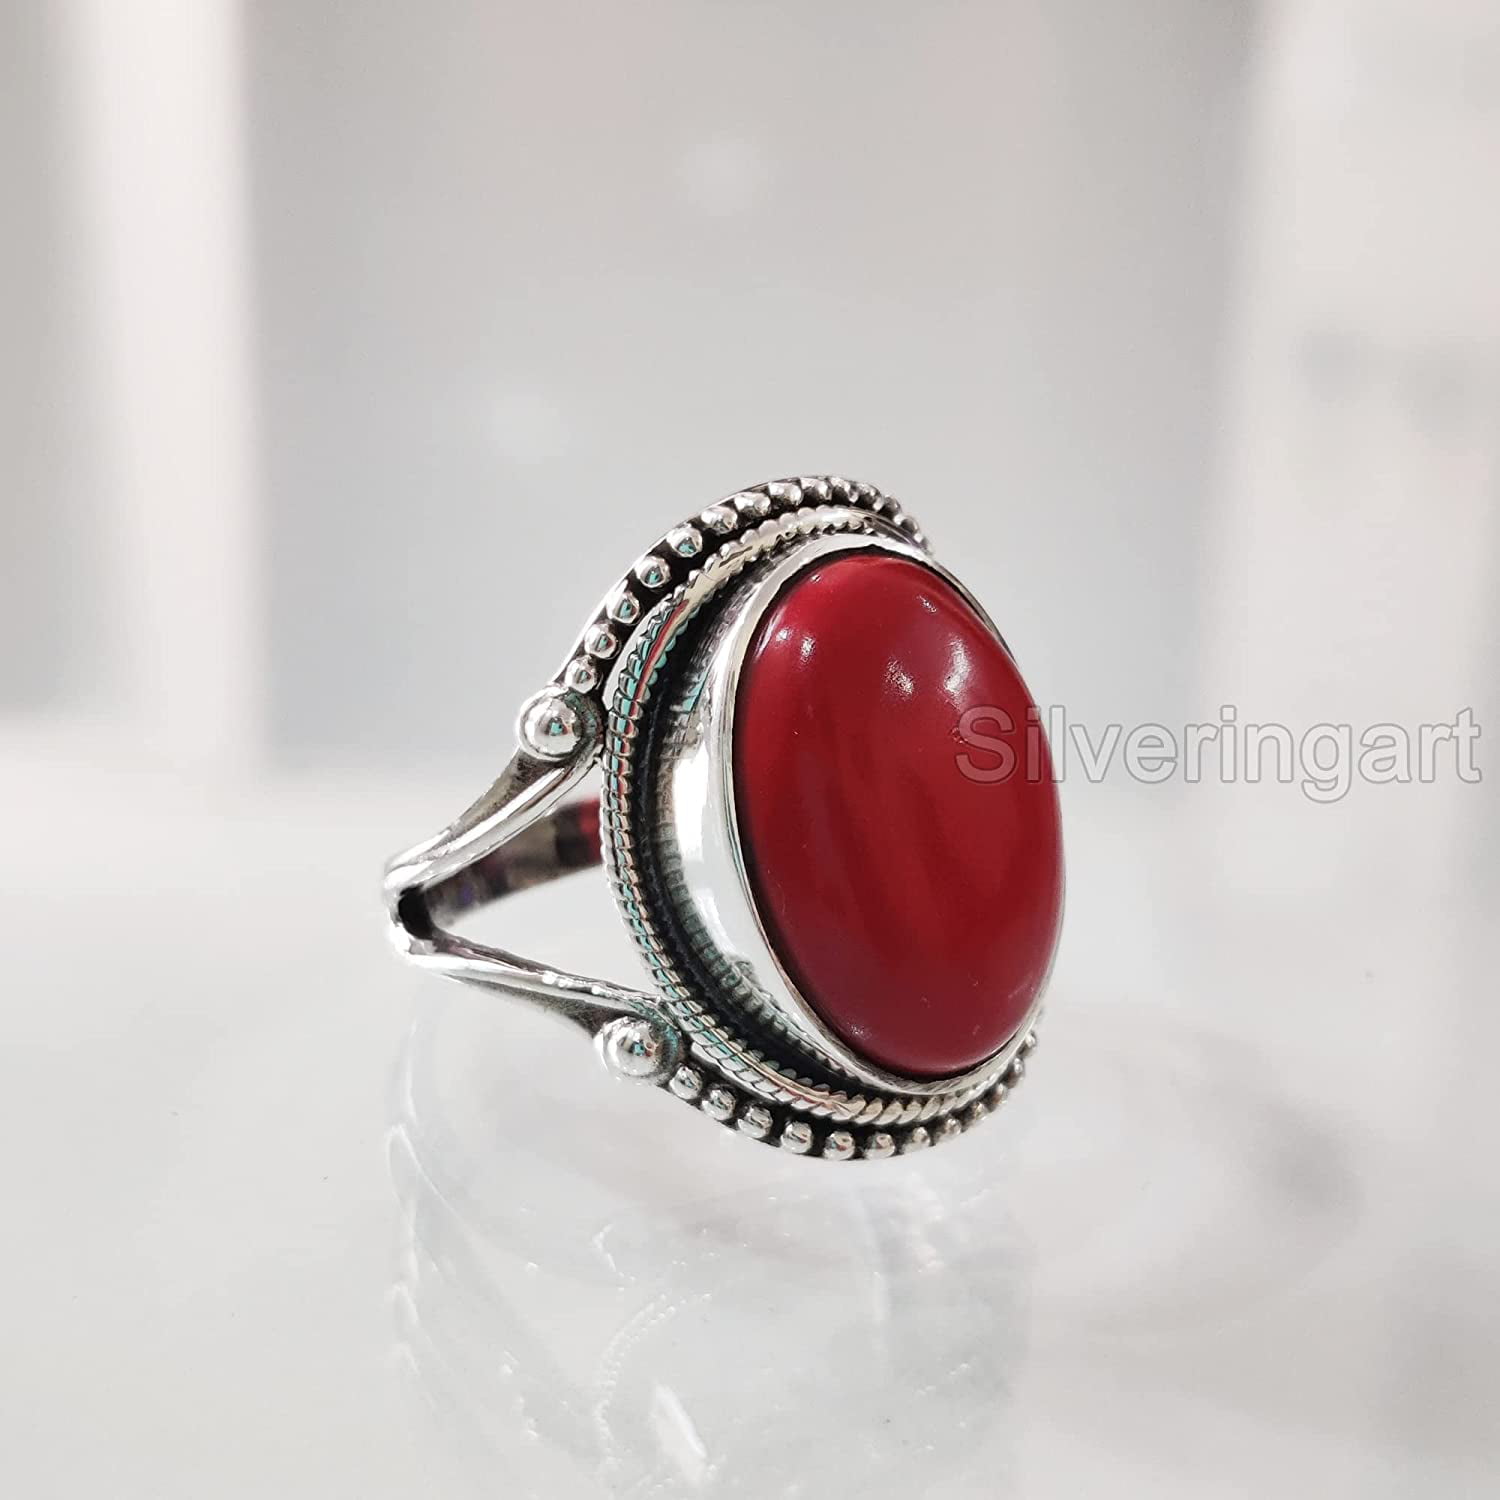 Natural Red Coral Ring, Woman's Coral Ring, Coral April Birthstone